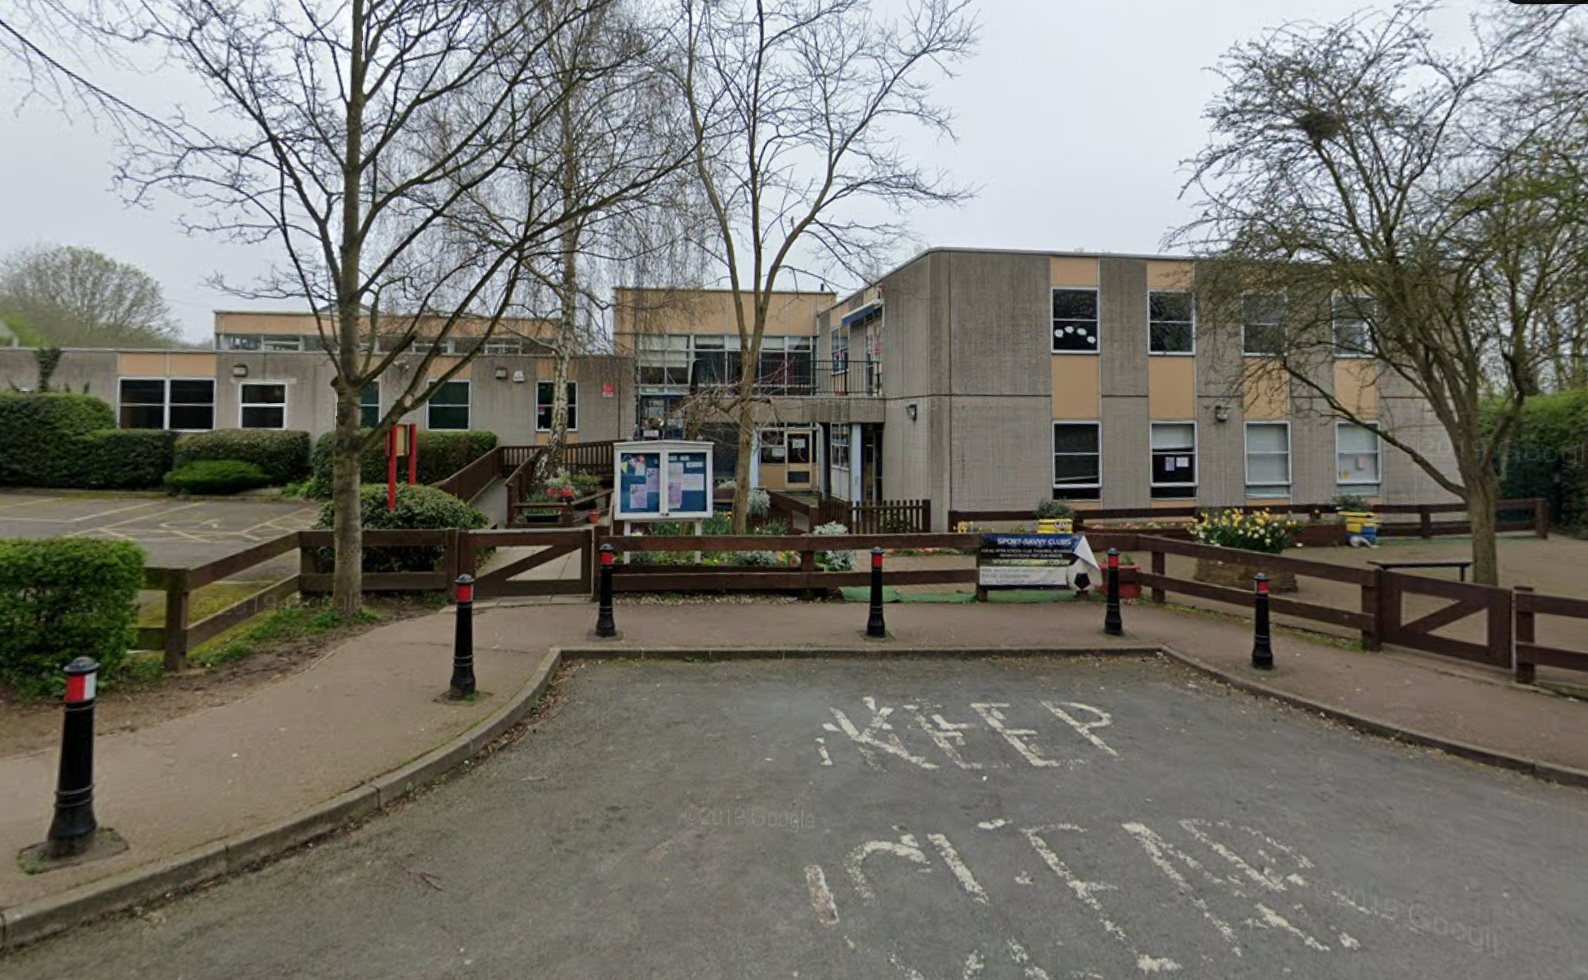 Buckhurst Hill Community Primary School in Essex said four classes would be taught at a nearby school